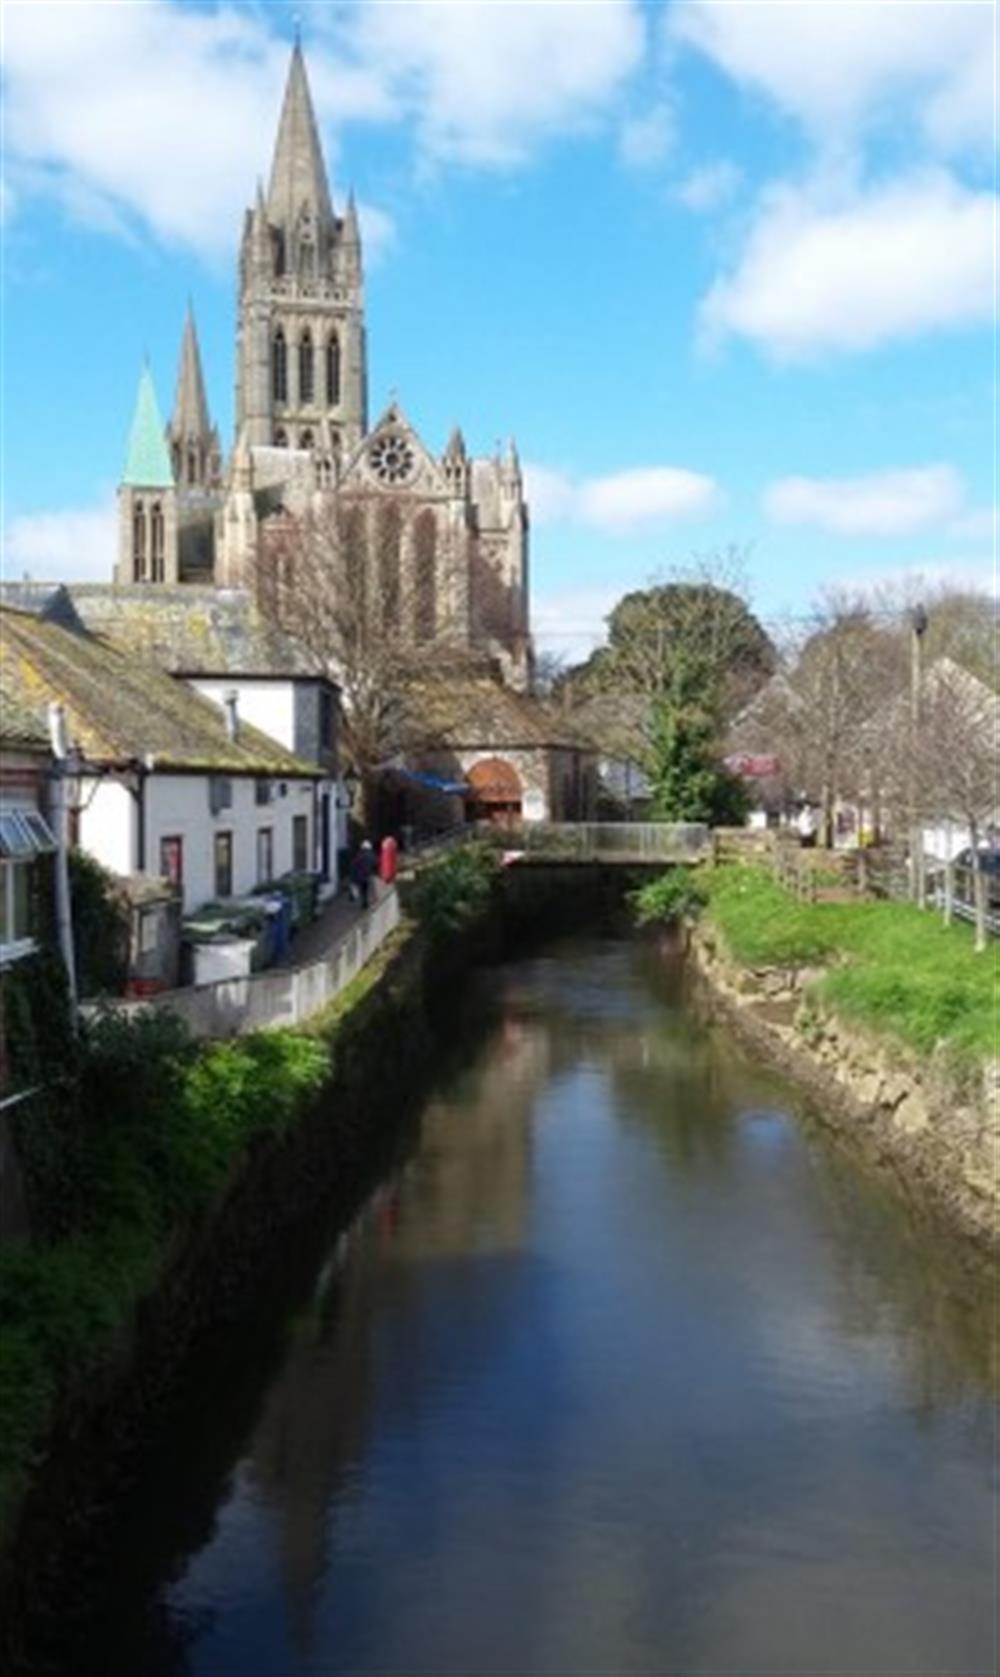 Truro is our main shopping centre. Do take a look at our beautiful cathedral. at Anchors Aweigh in Helford Passage